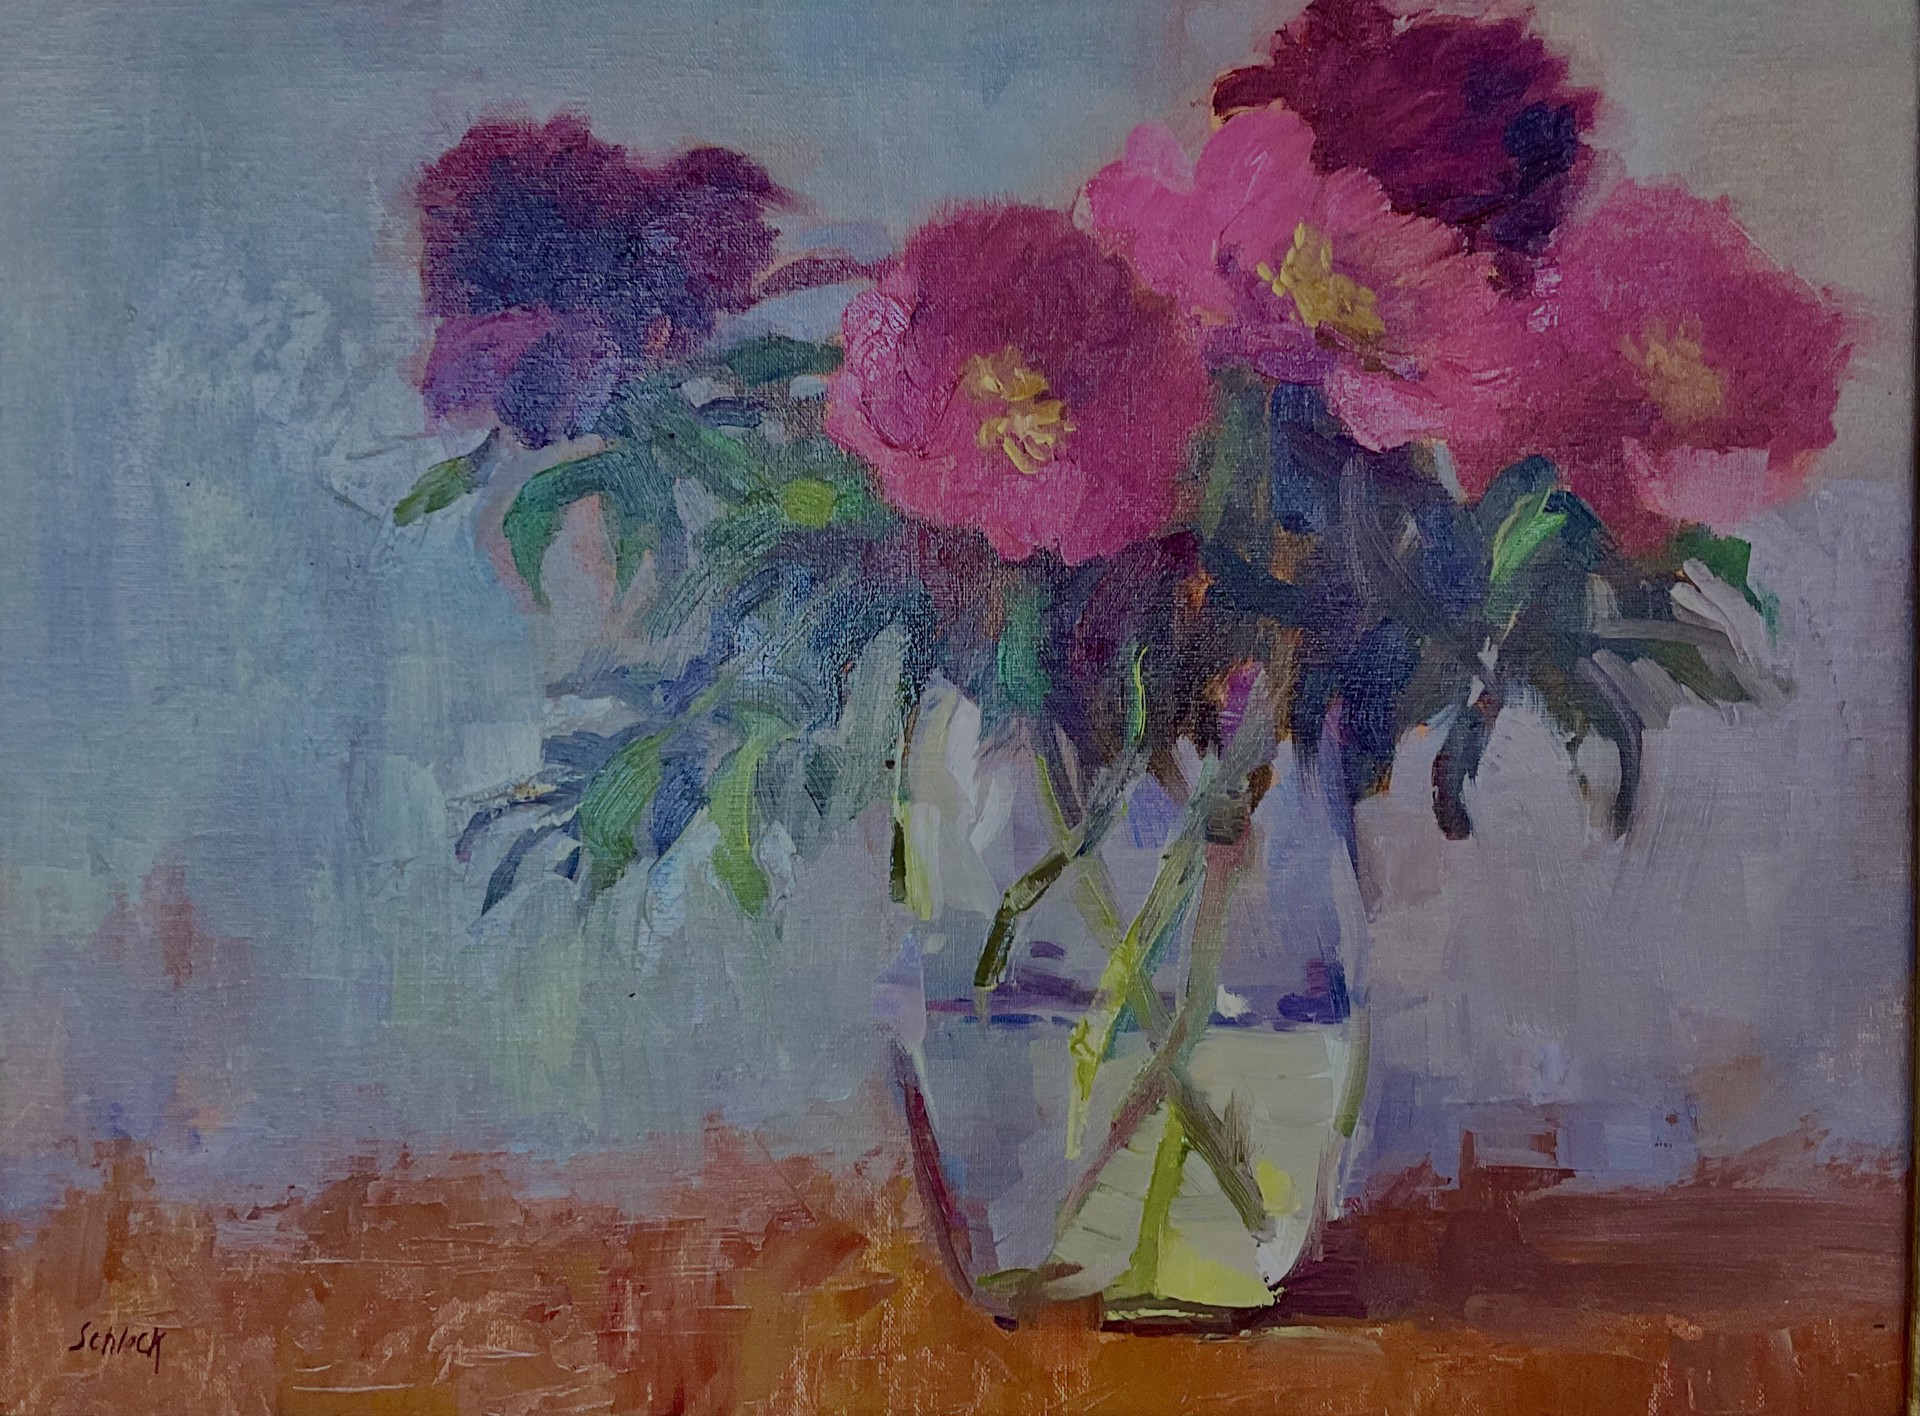 “Early Spring Peonies” by Suzanne Schleck